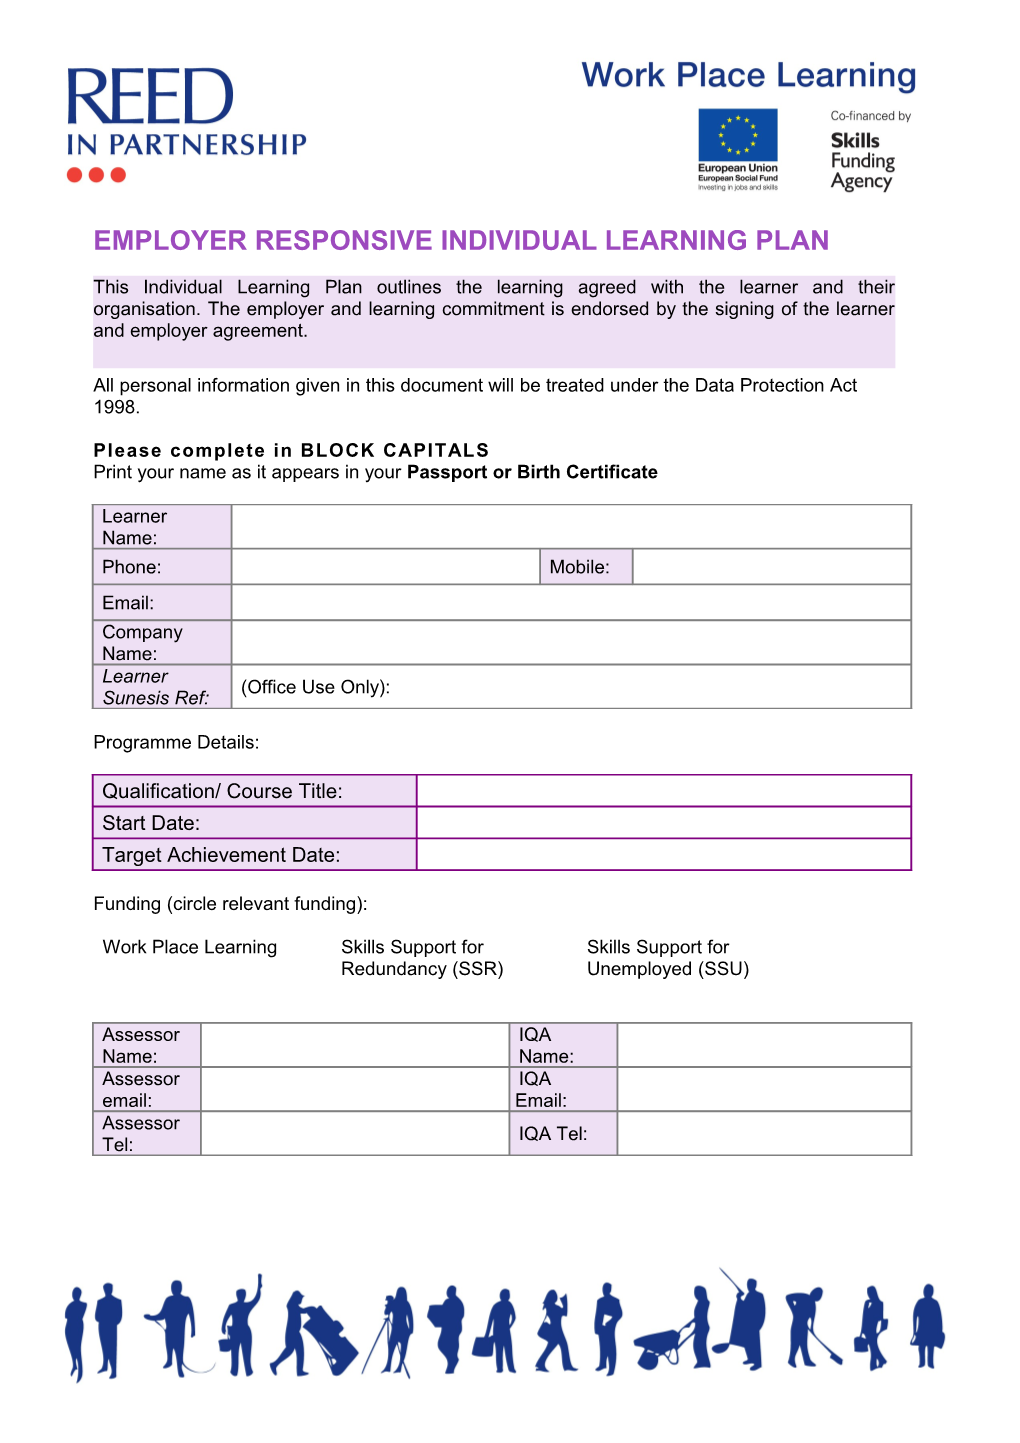 Employer Responsive Individual Learning Plan